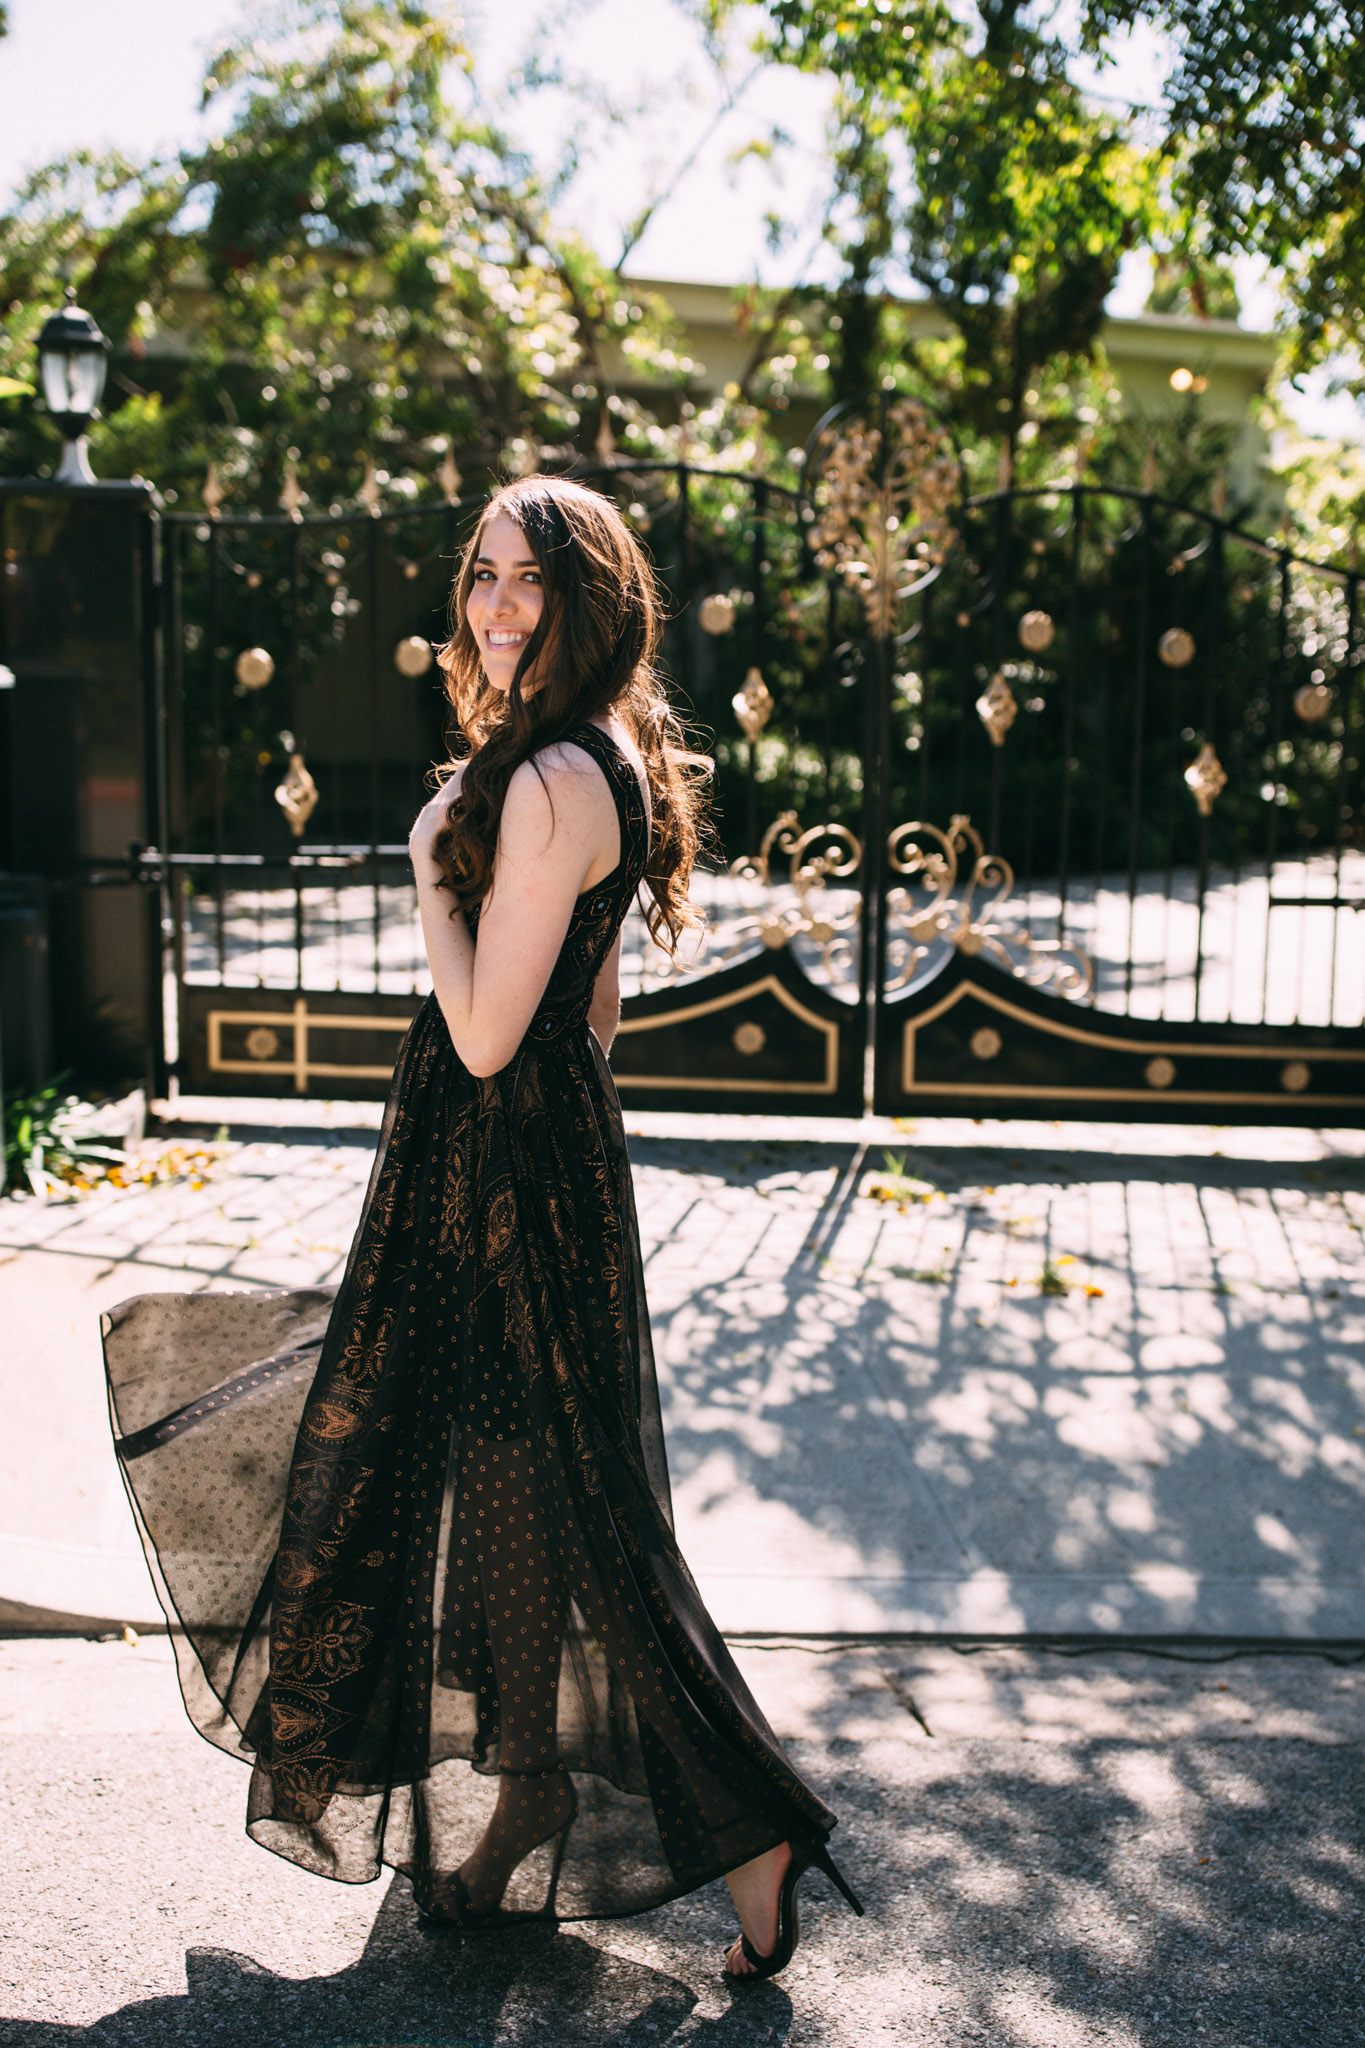 Free People party dresses